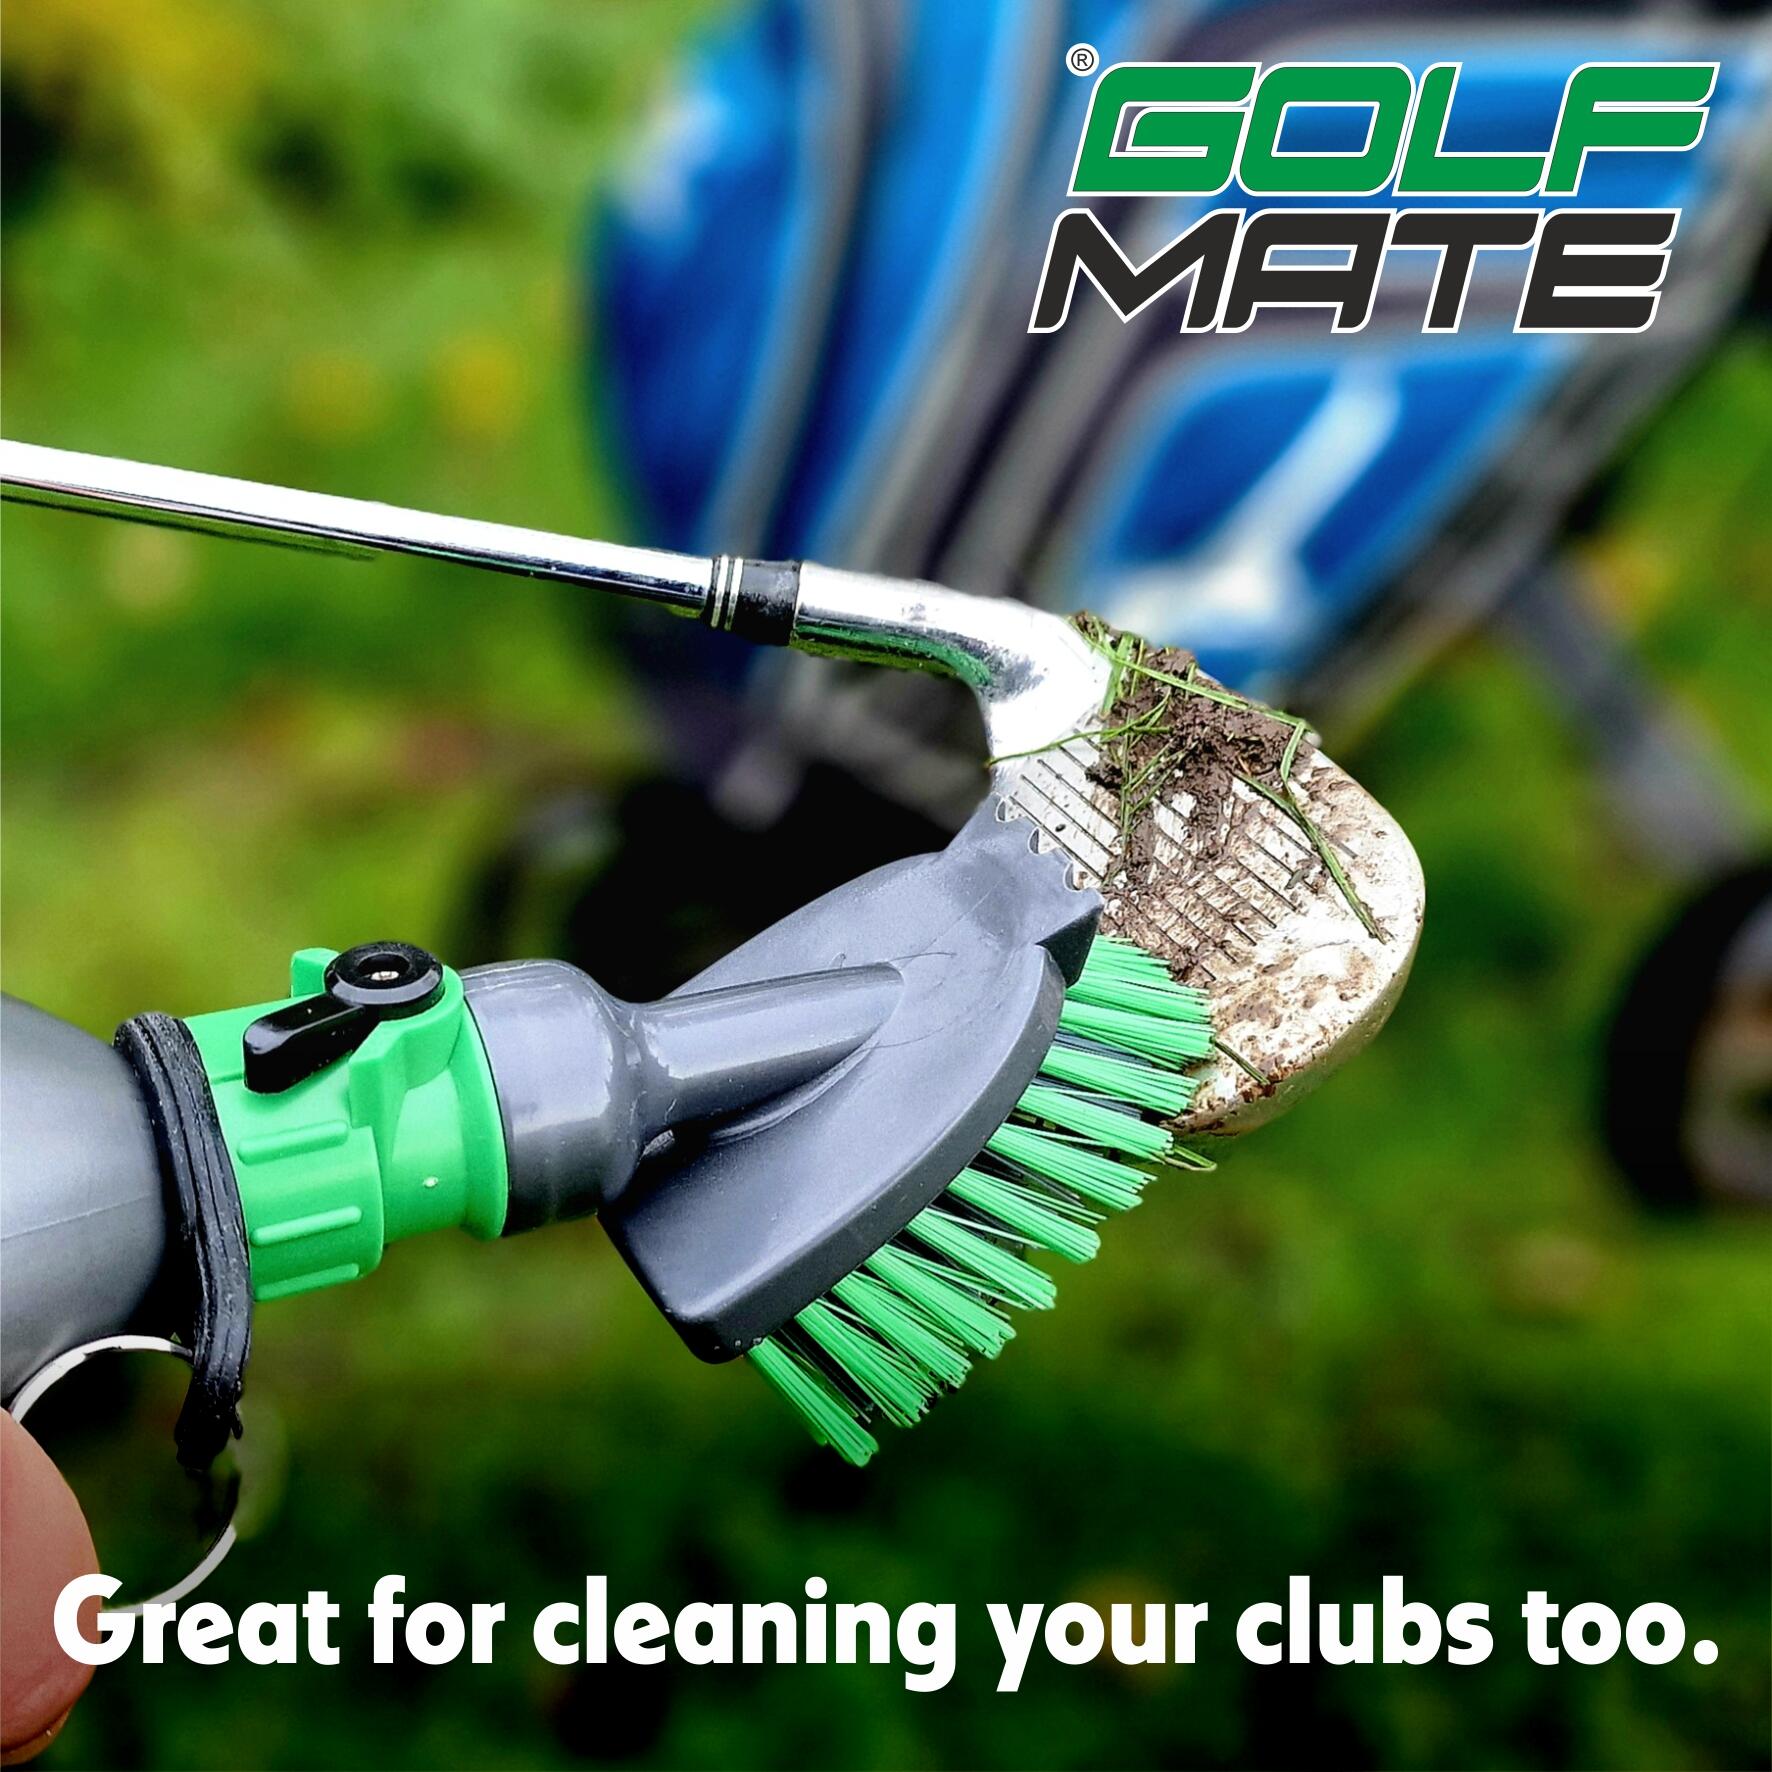 Golf Mate – The ultimate cleaning kit for golf shoes, clubs & trolley wheels. 5/8